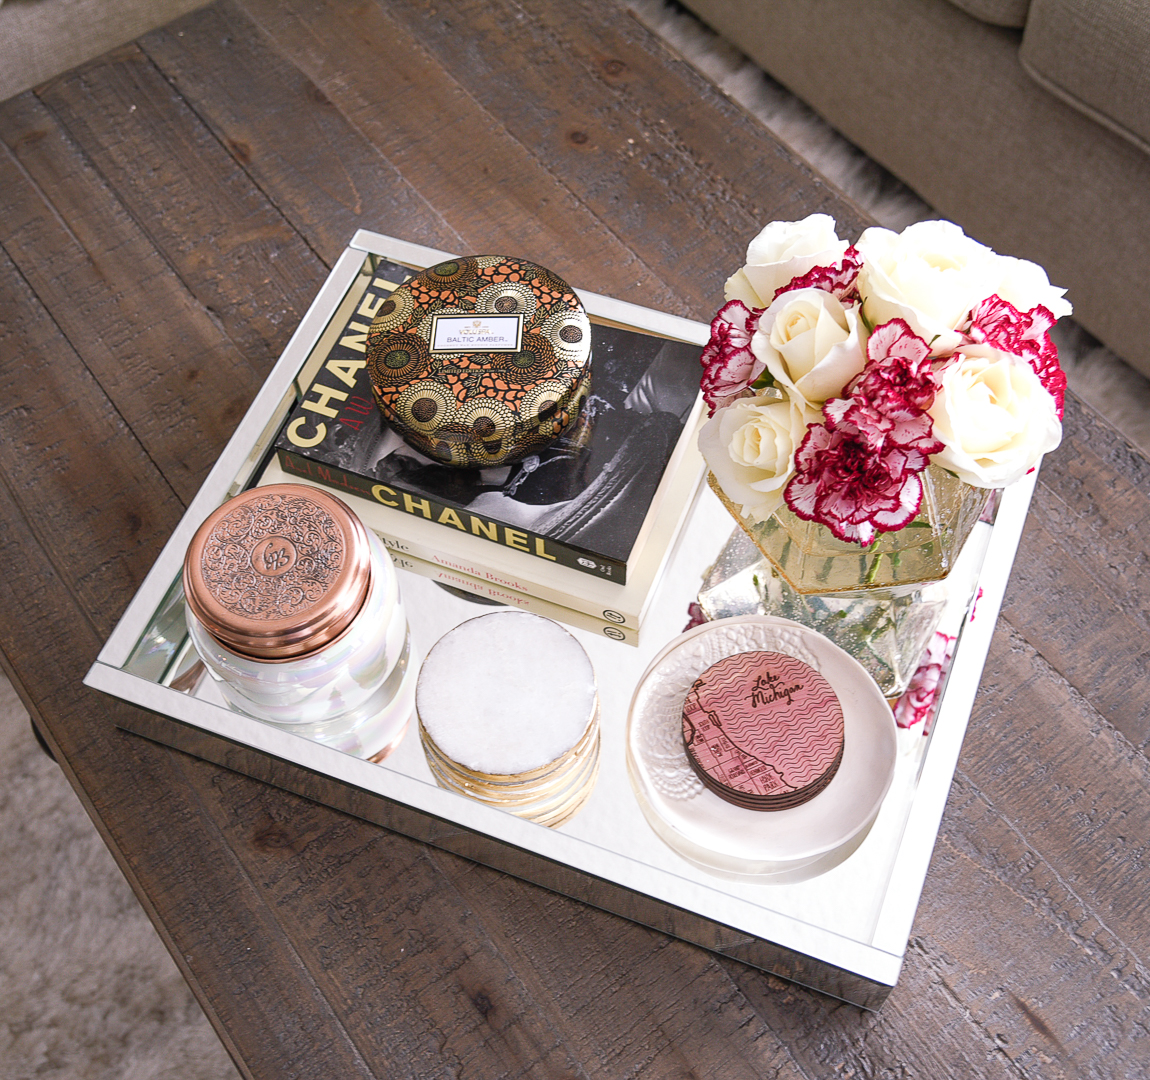 The west elm mirrored tray with Chicago themed wood coasters from Uncommon Goods. 